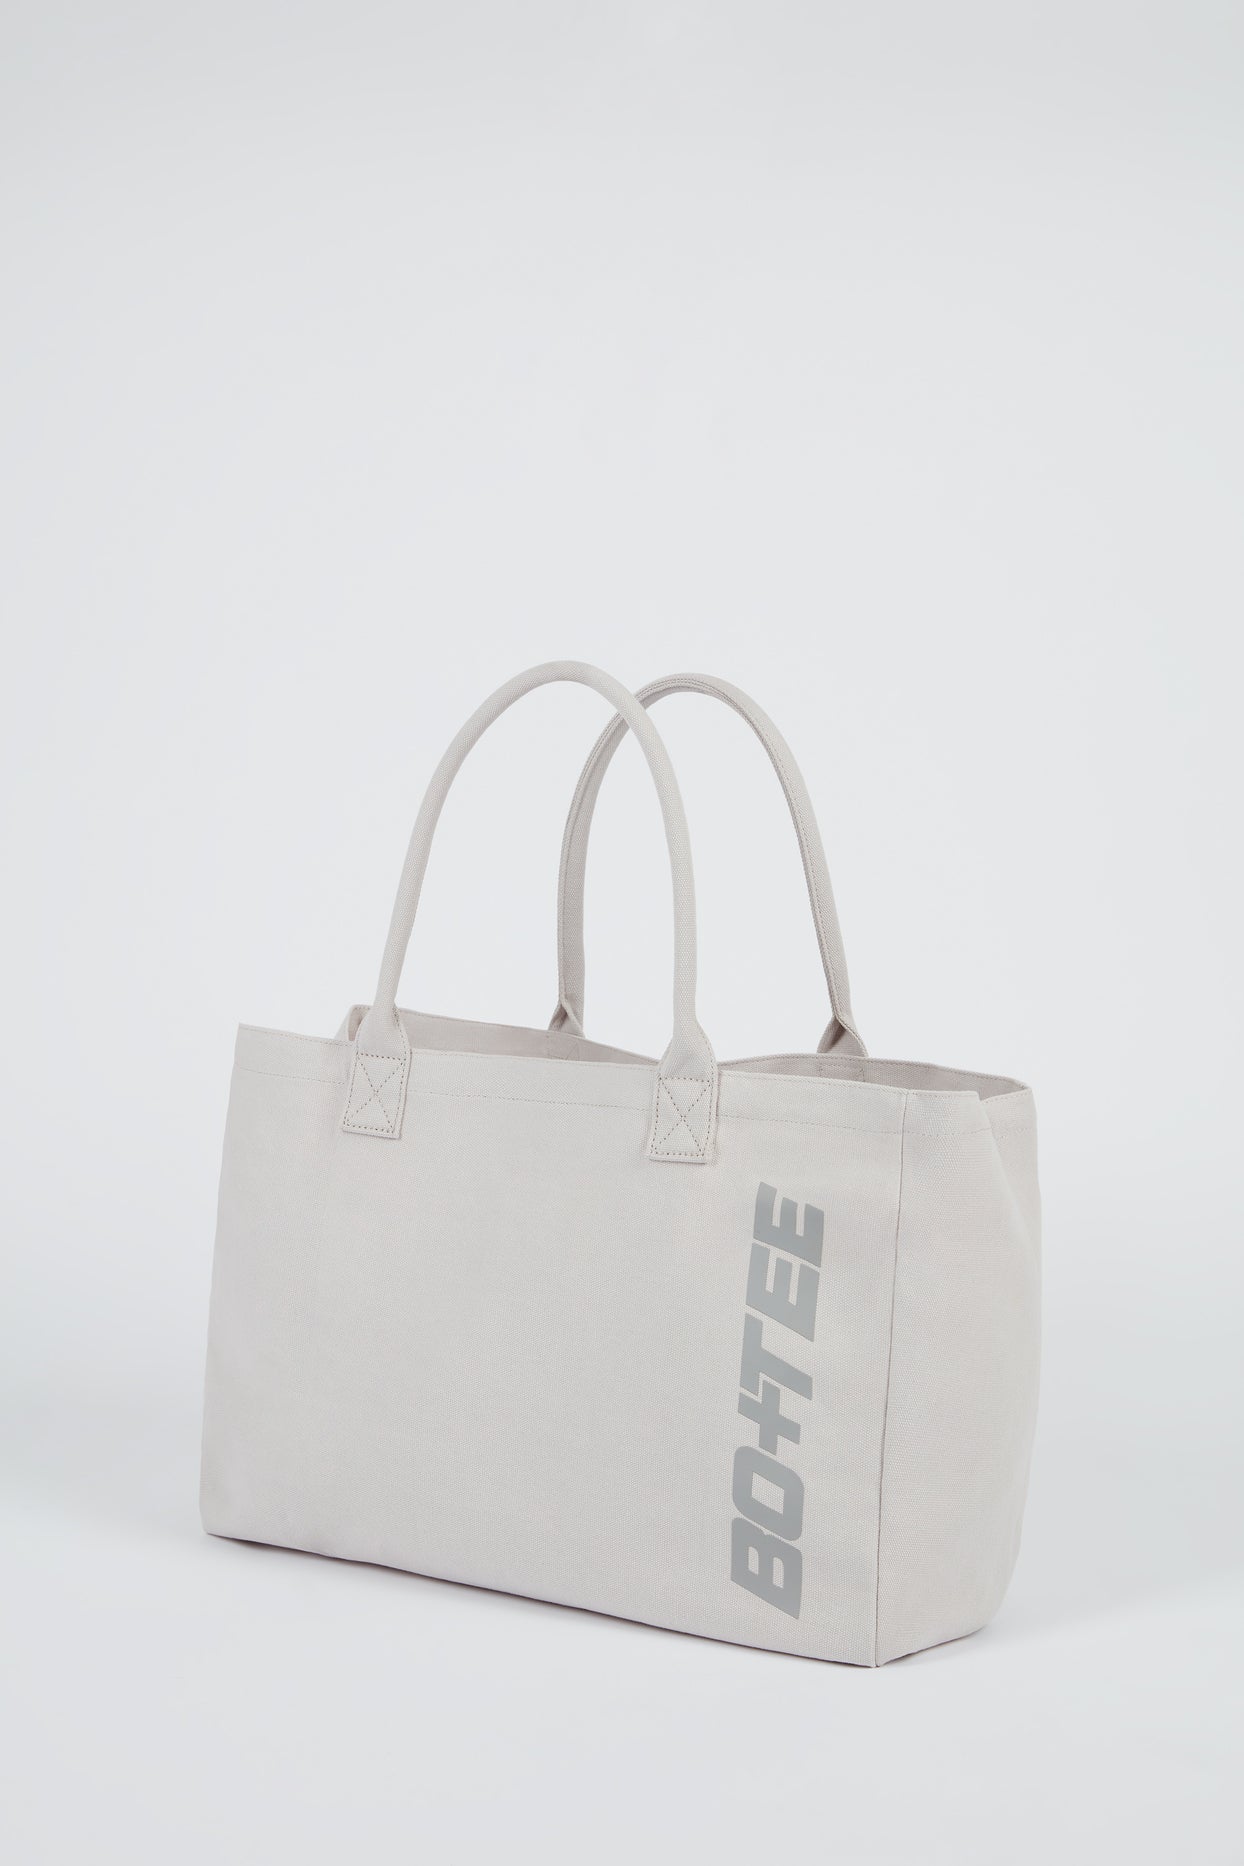 Routine Tote Bag in Grey